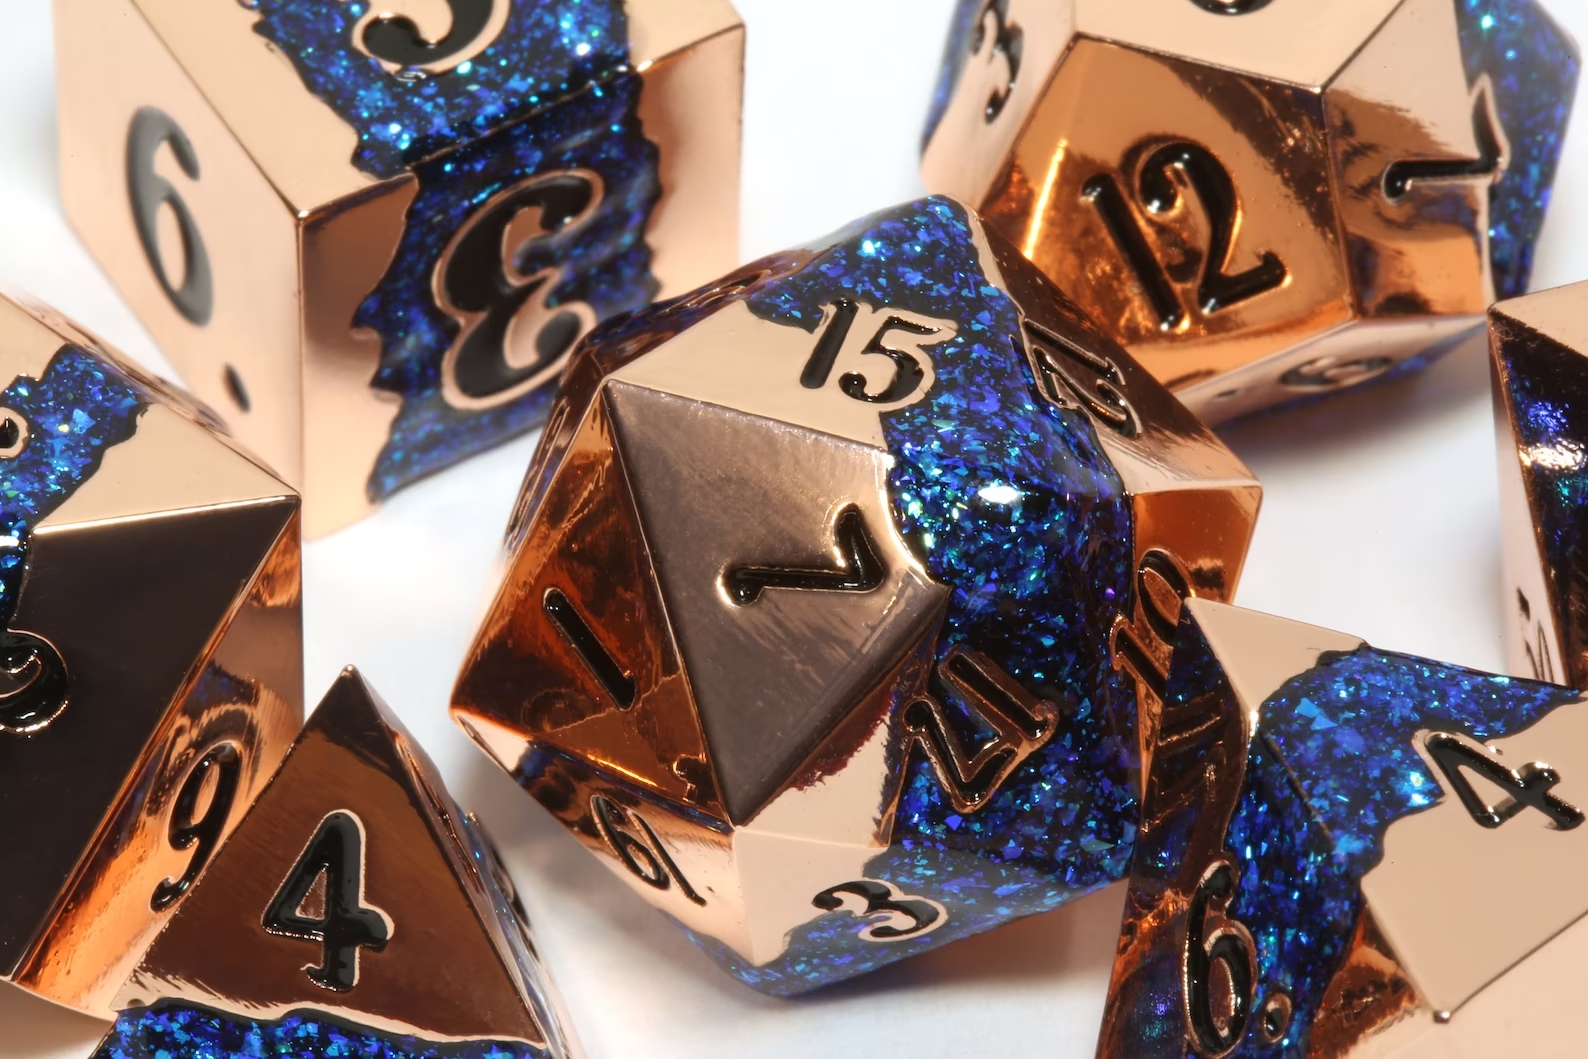 Dice made from copper with veins of sparkly blue resin